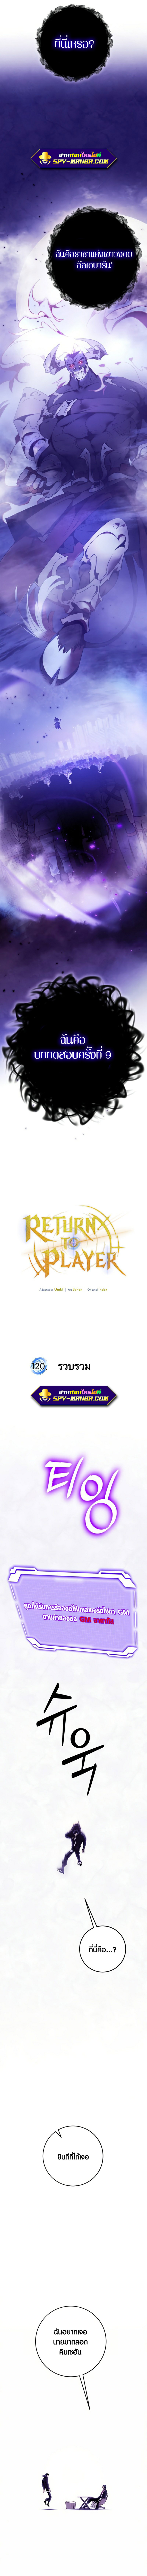 Return to Player 120 5